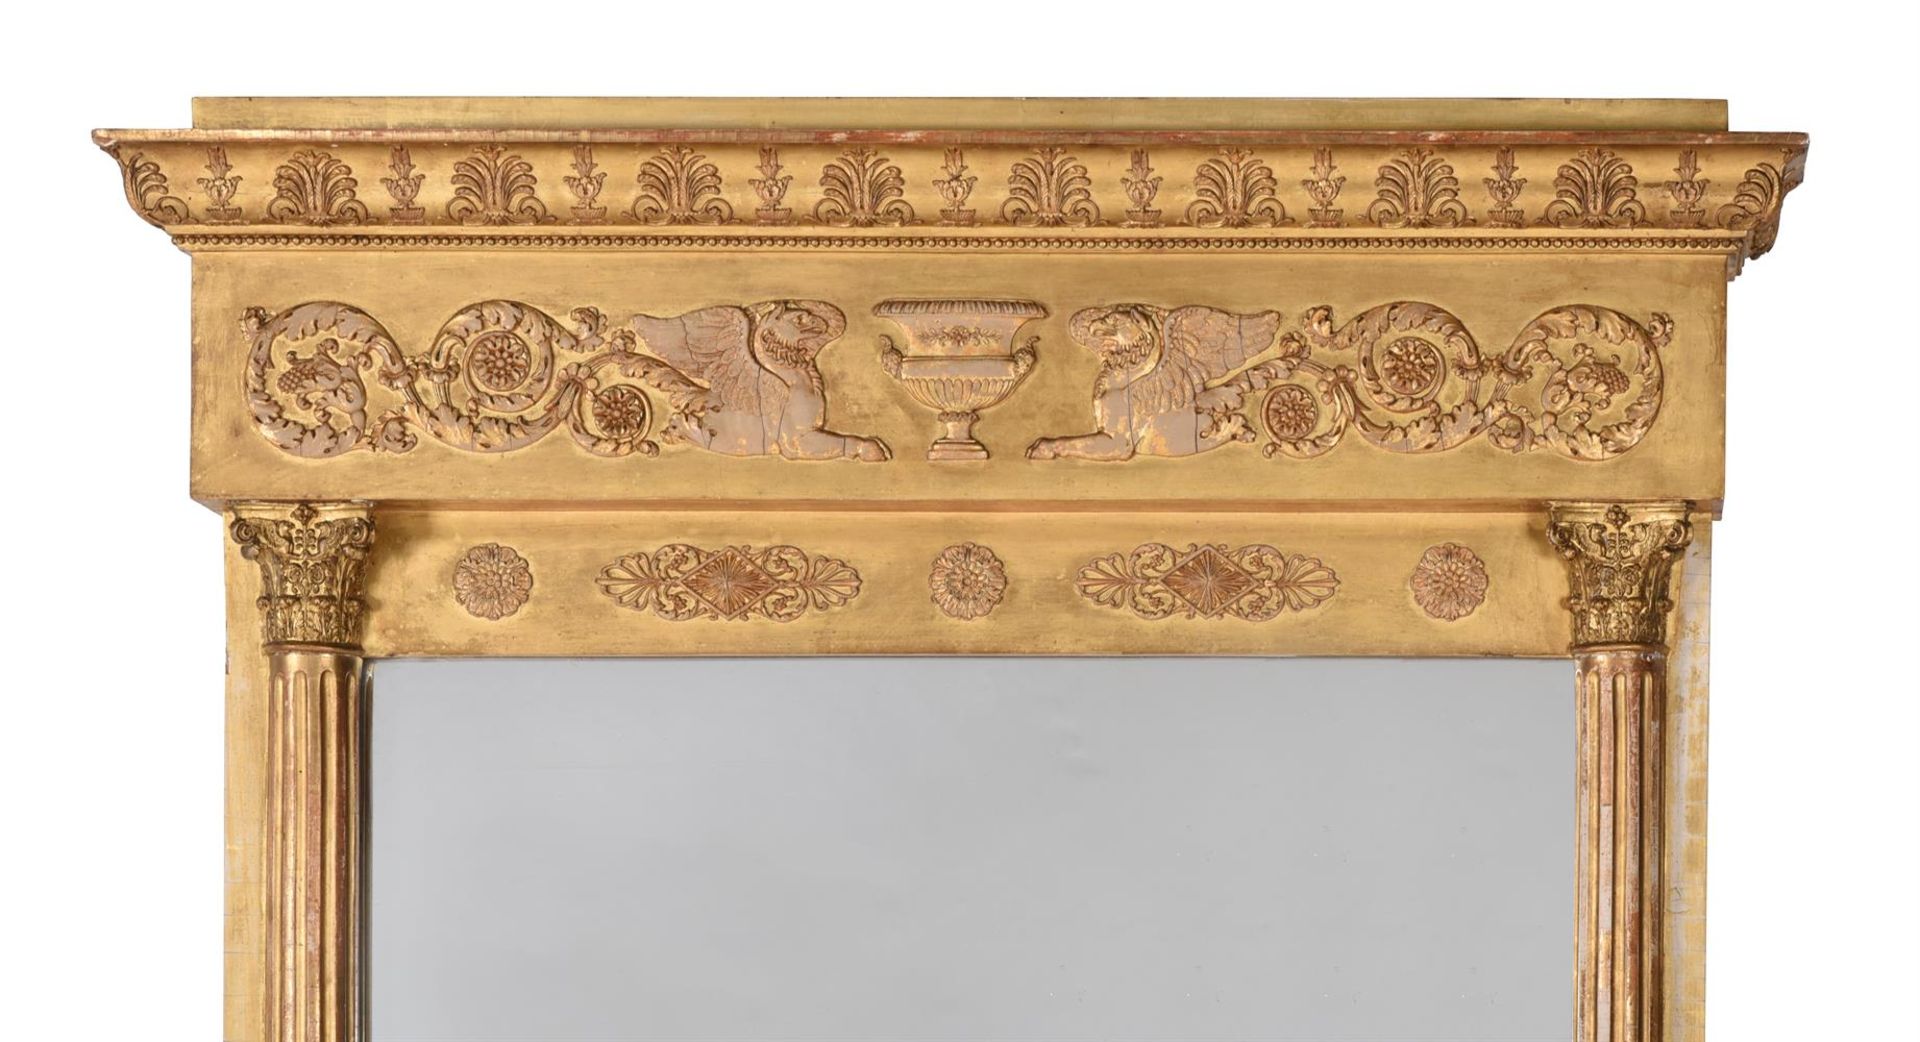 AN EMPIRE GILTWOOD AND GILT GESSO PIER MIRROR, FRENCH, EARLY 19TH CENTURY - Image 2 of 4